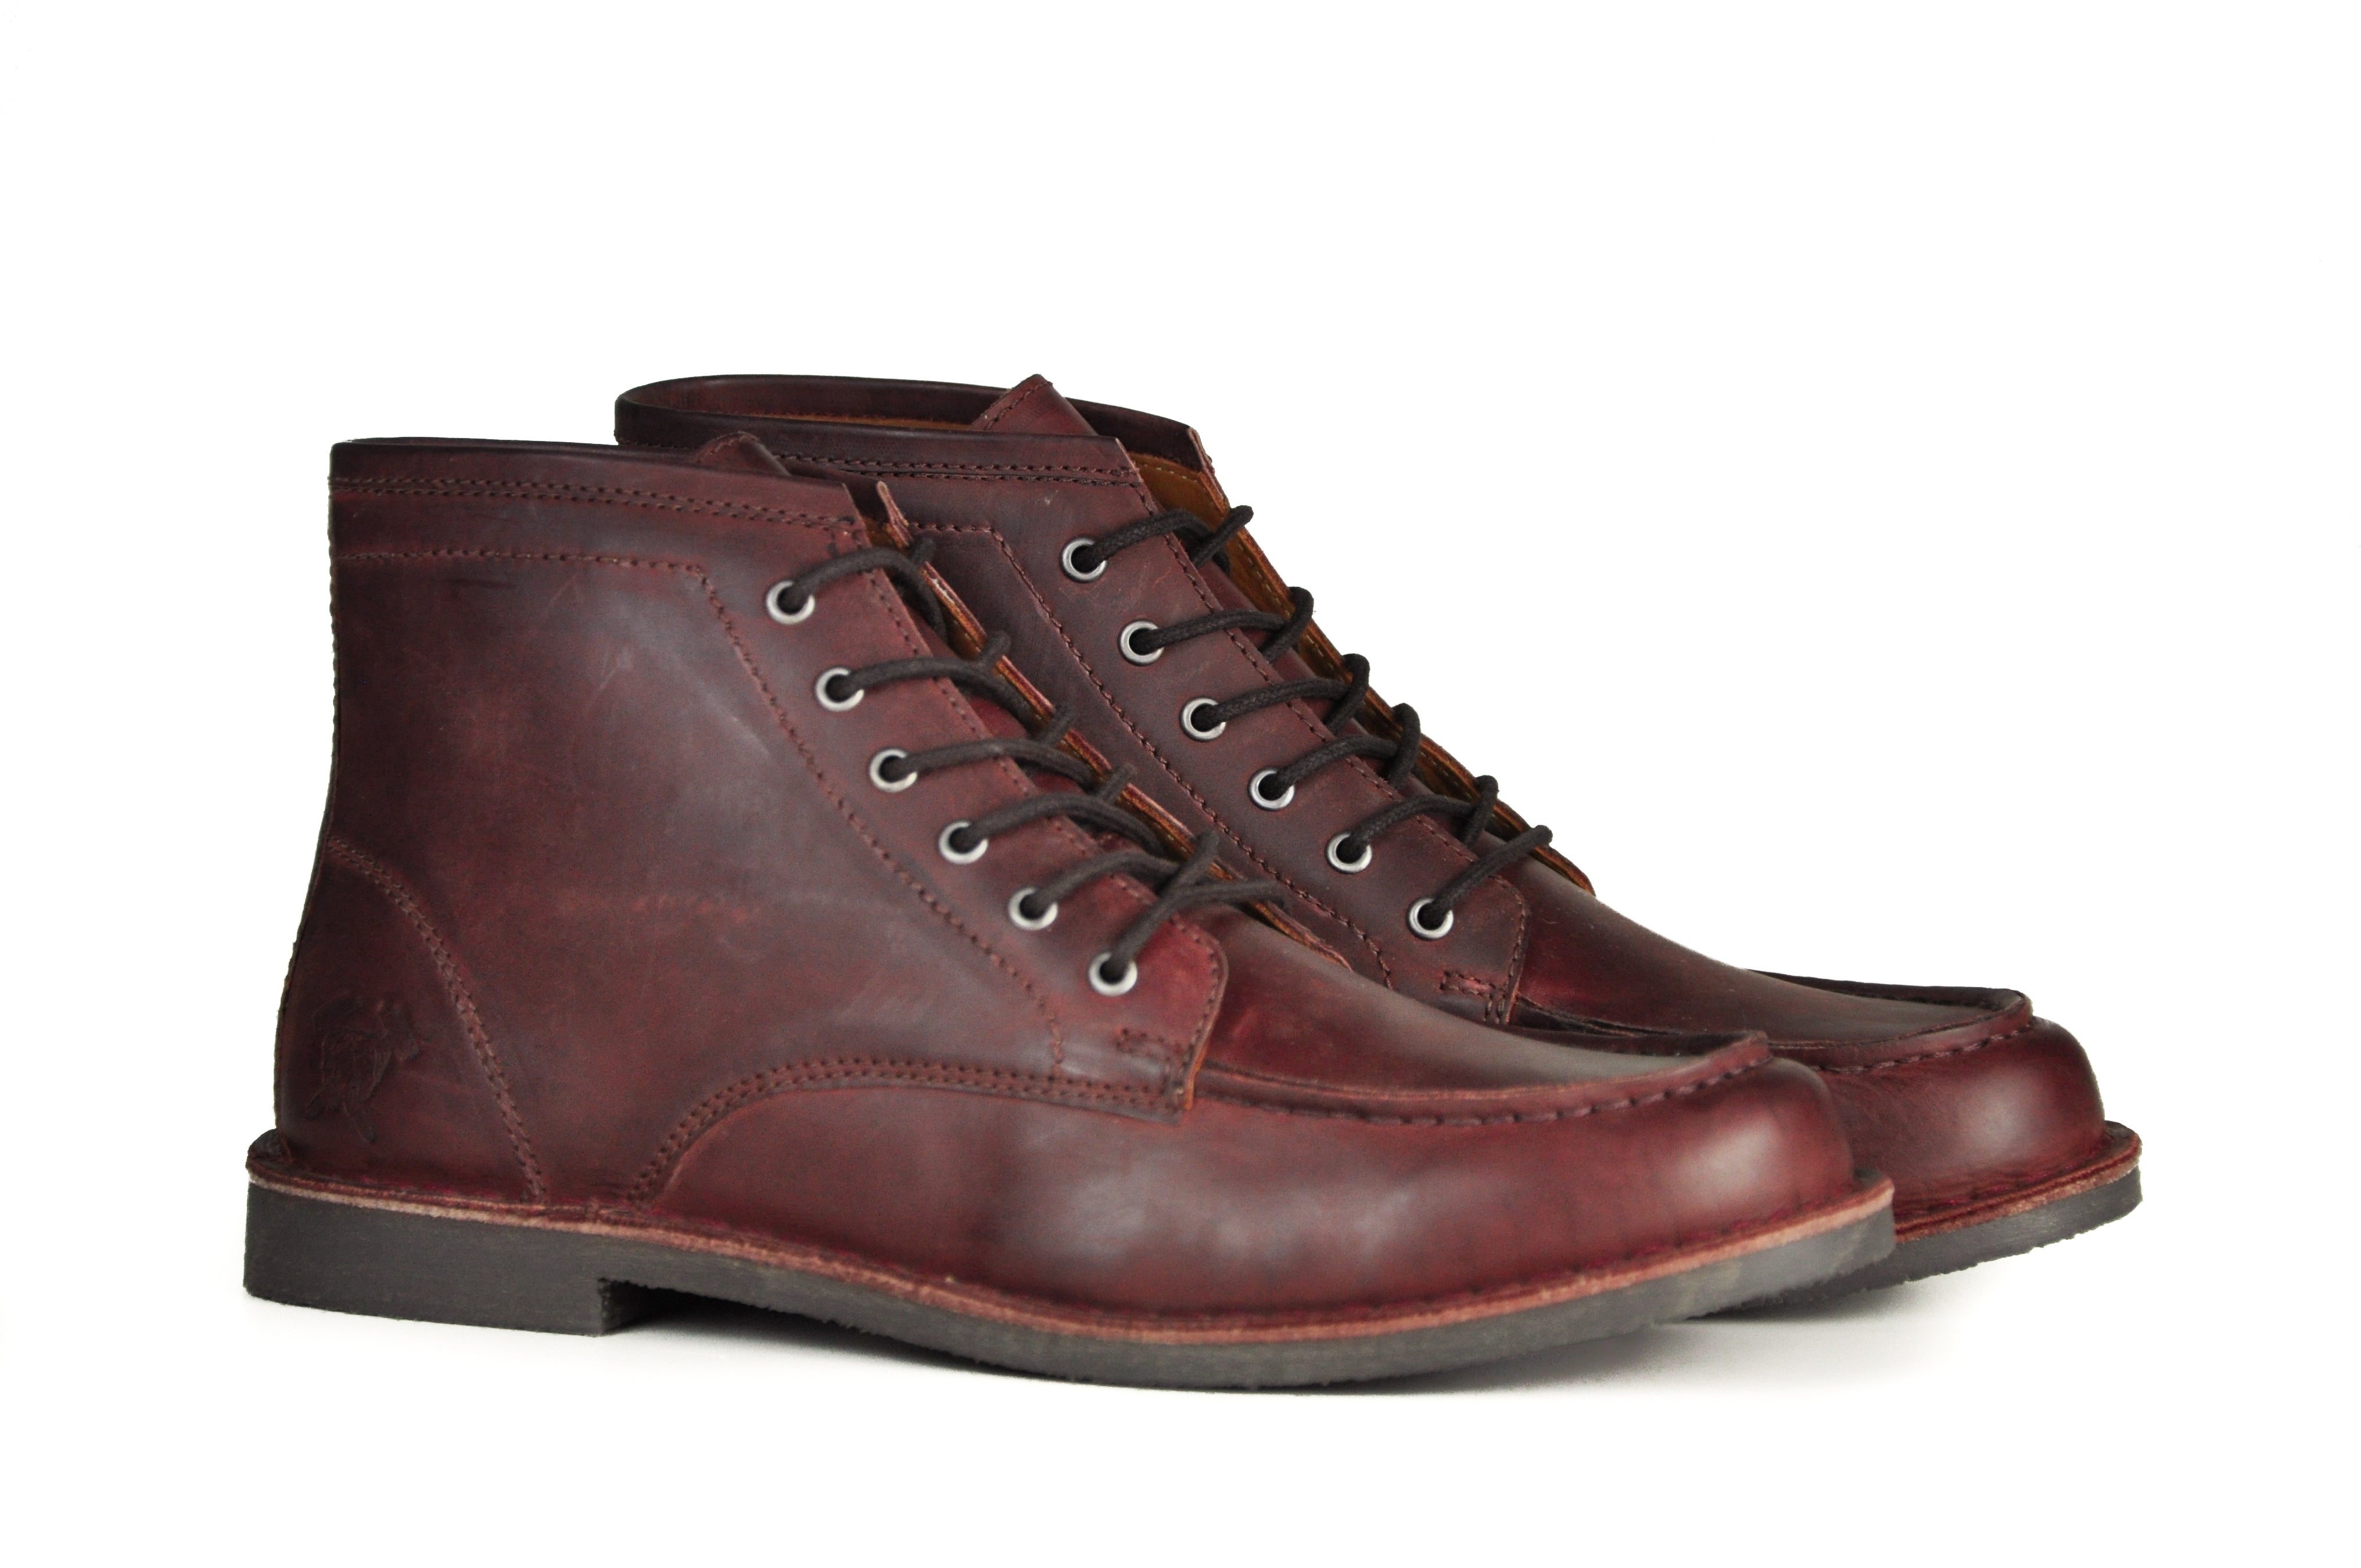 Classic Work Boot - The Cooper | Oxblood Leather - Hound and Hammer Boots